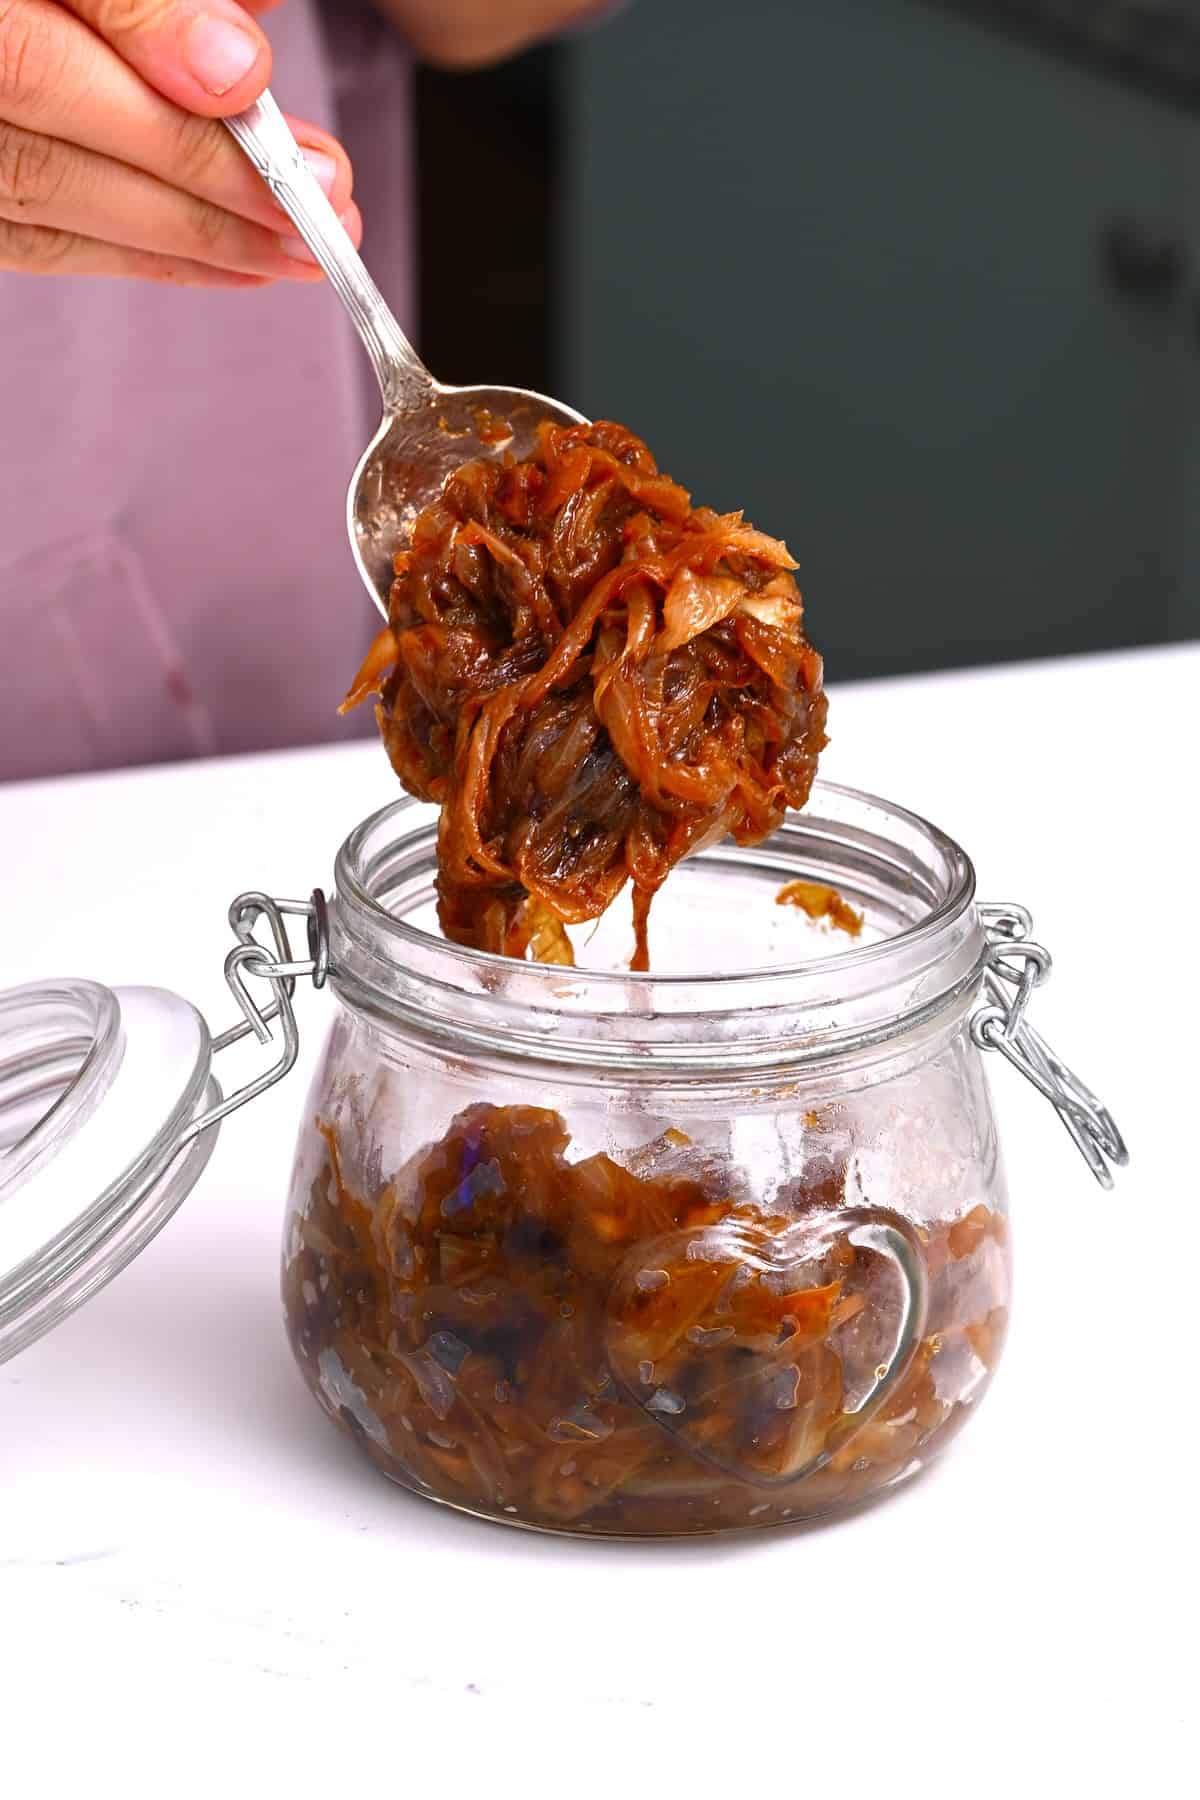 Placing caramelized onions in a jar